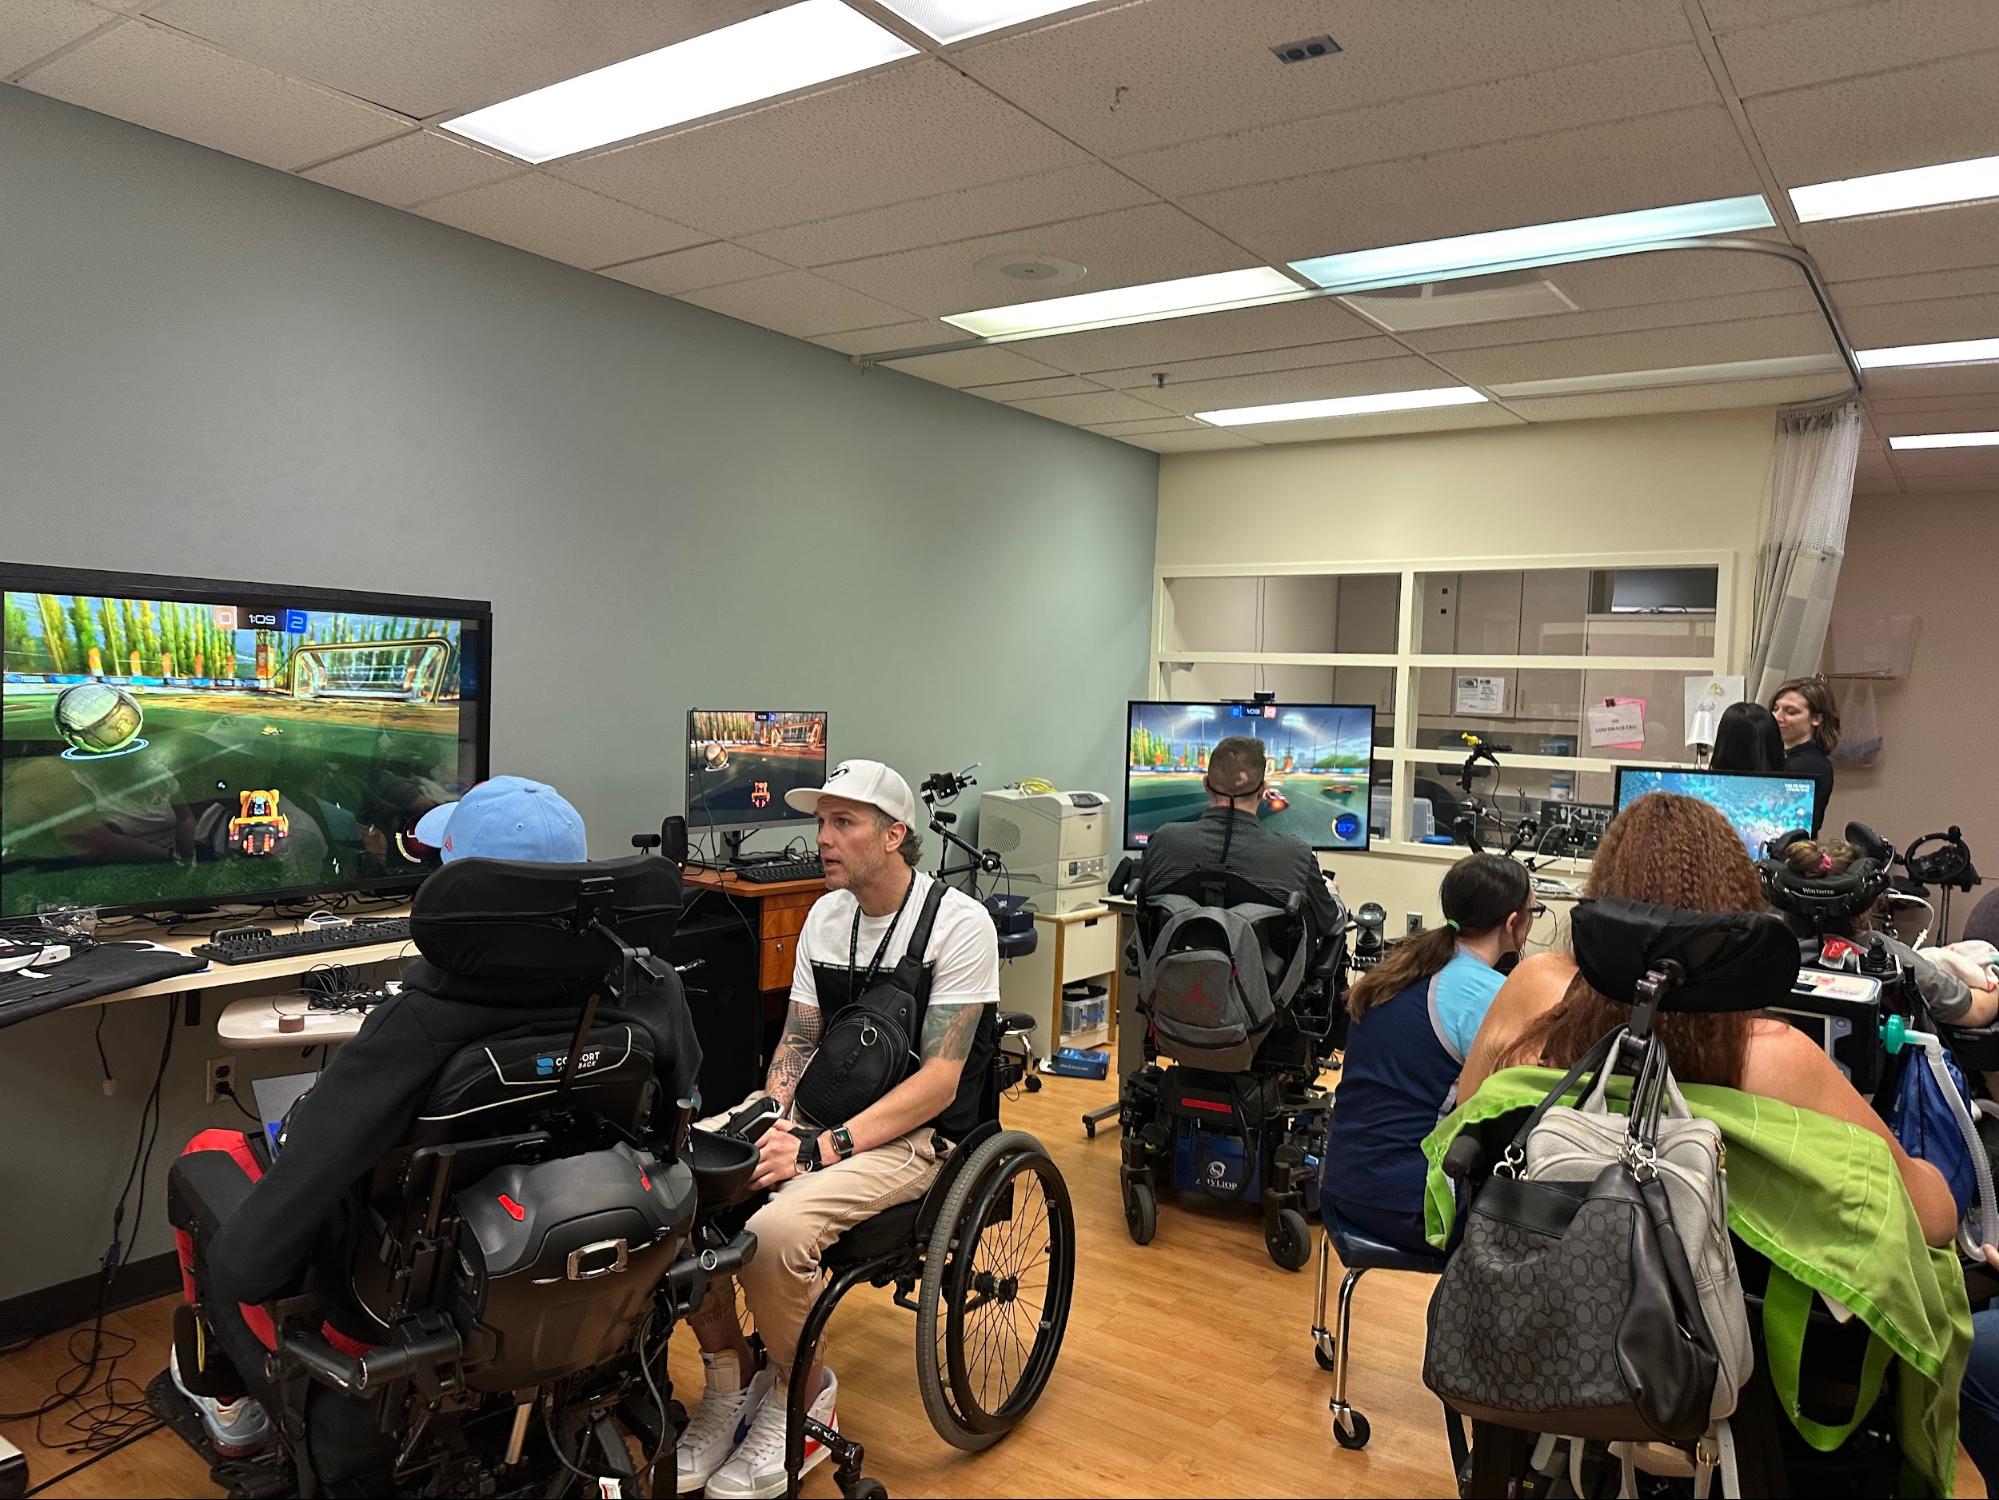 gamers in wheelchairs playing video games